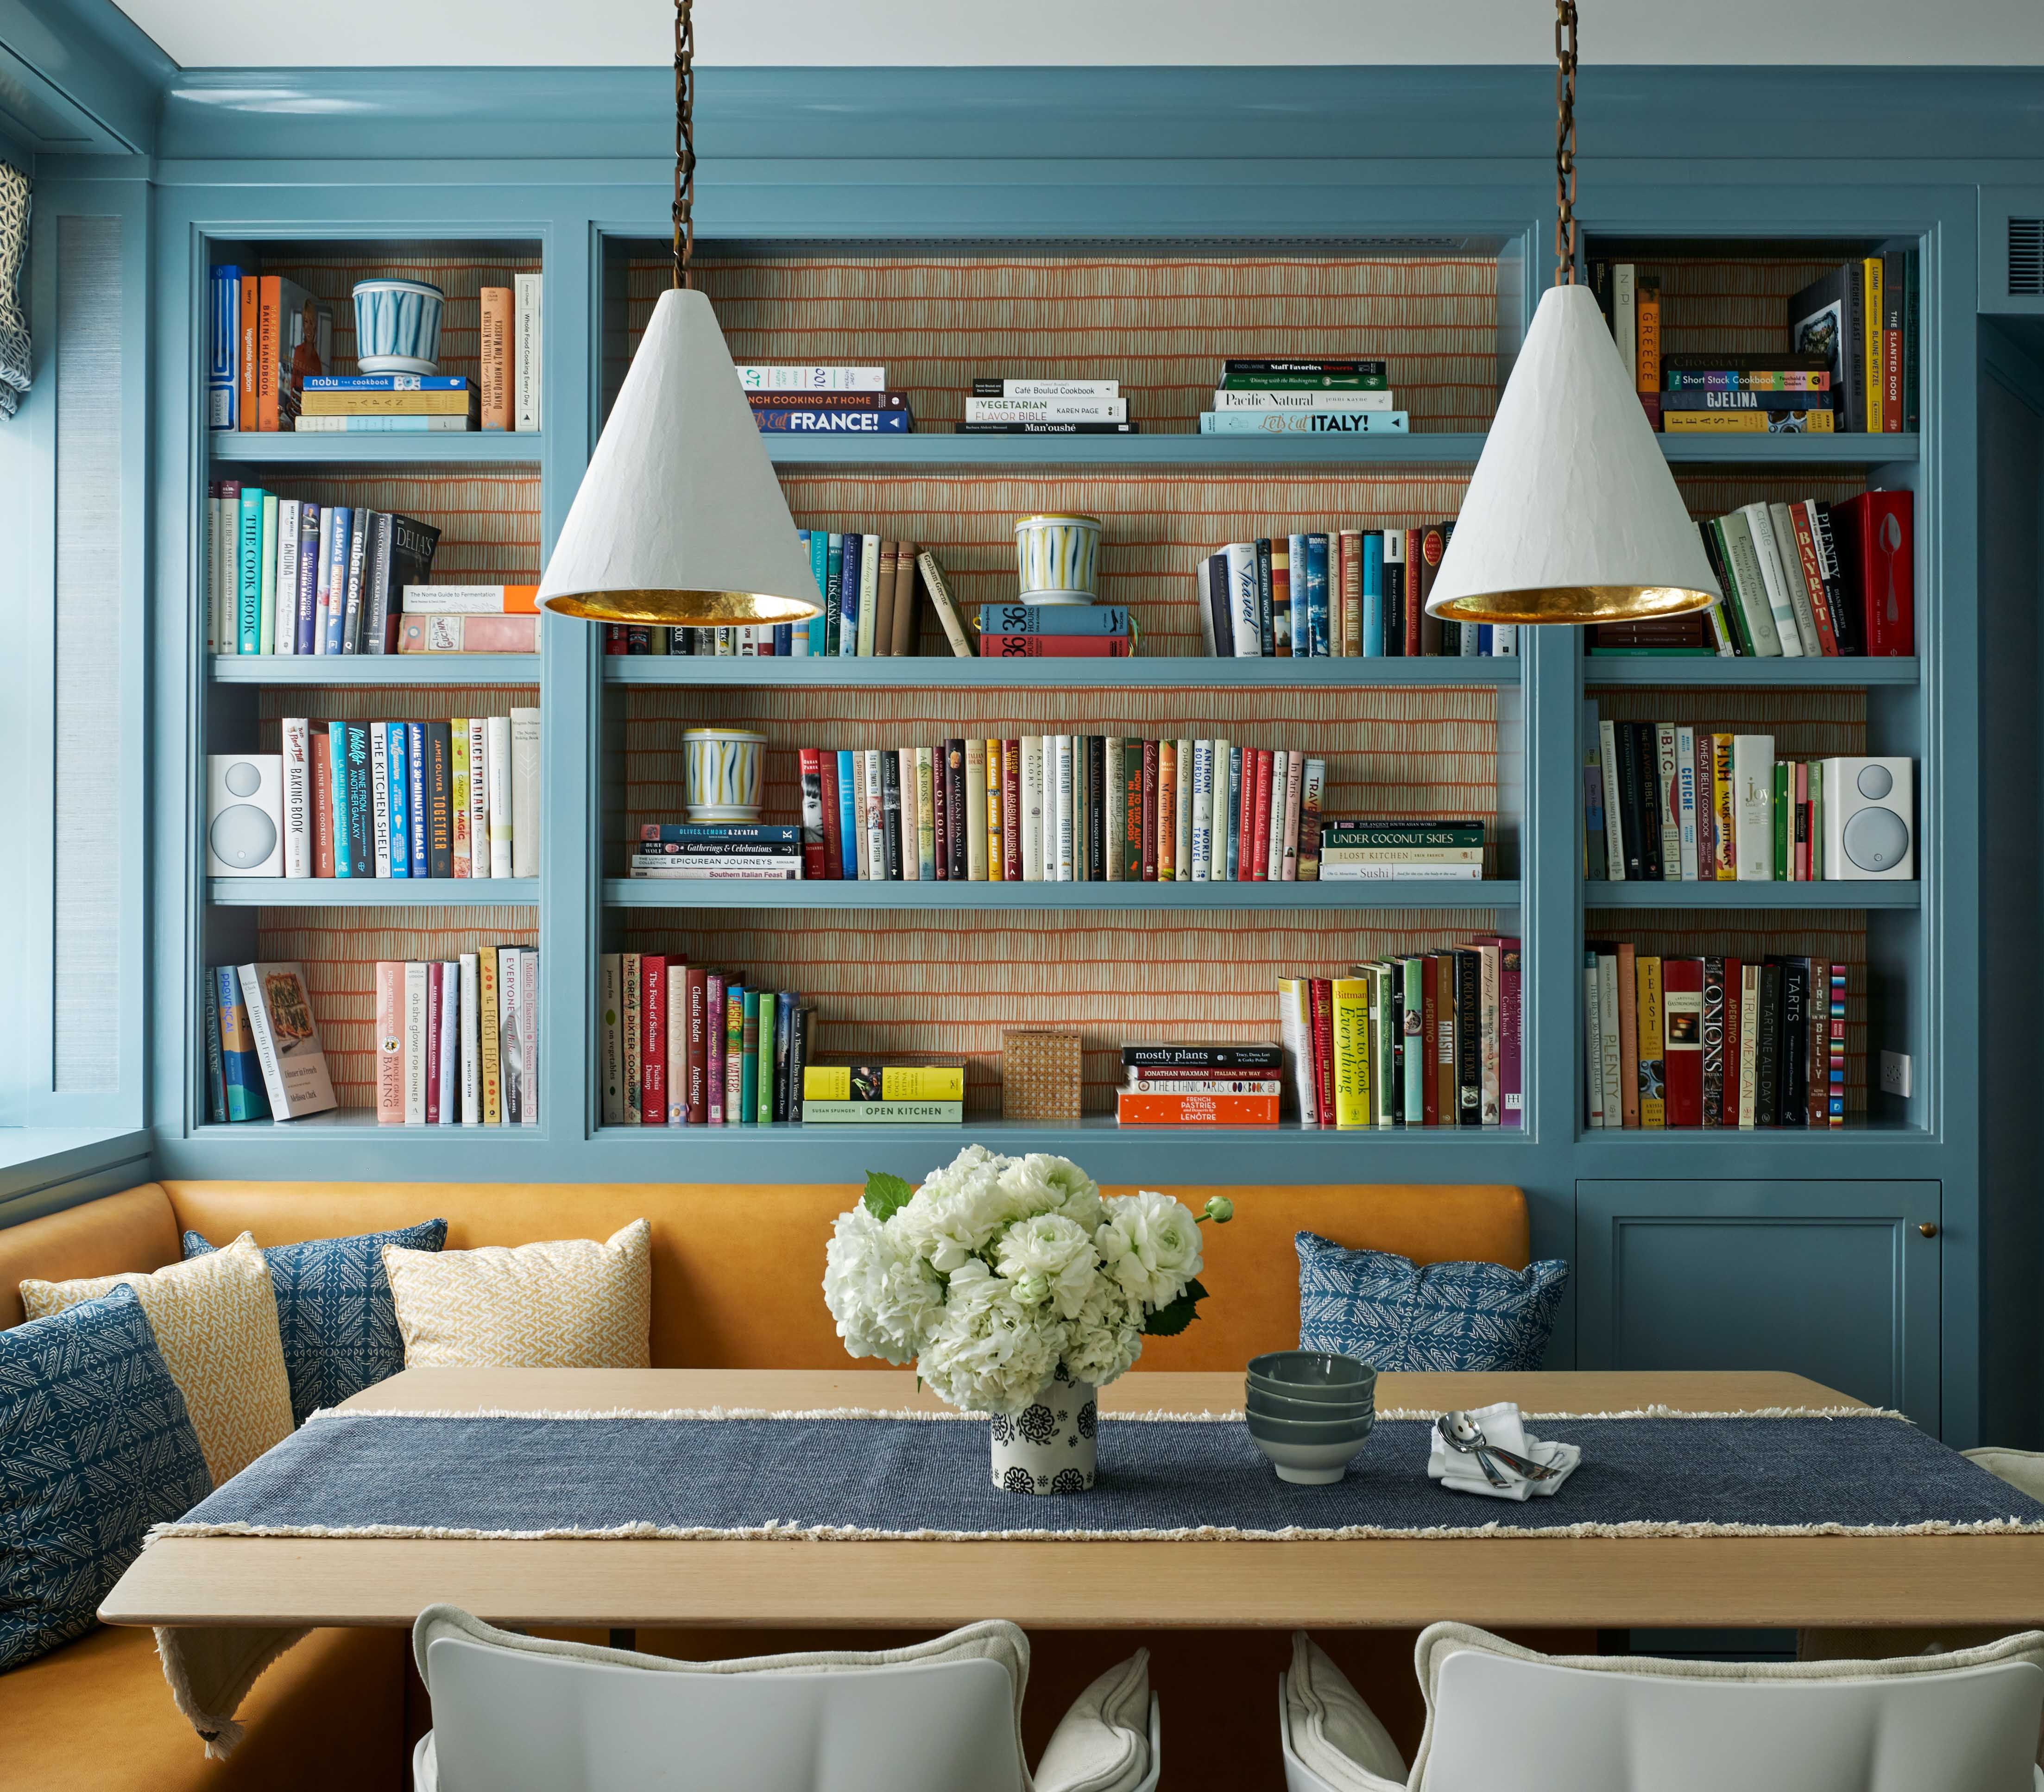 35 Charming Banquette Seating Ideas